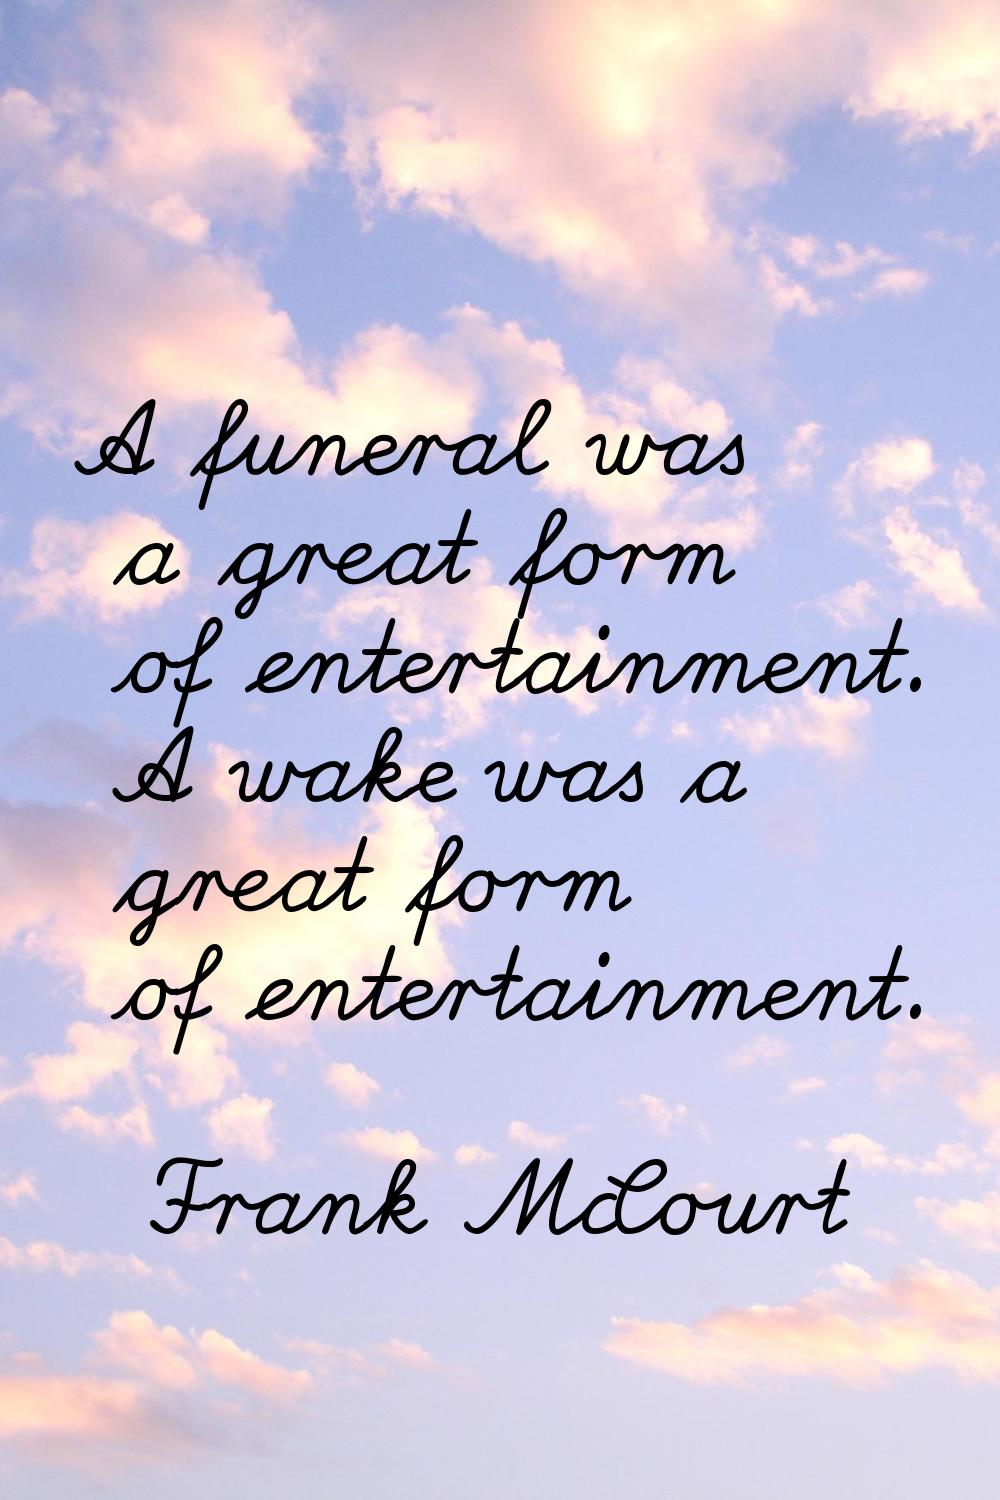 A funeral was a great form of entertainment. A wake was a great form of entertainment.